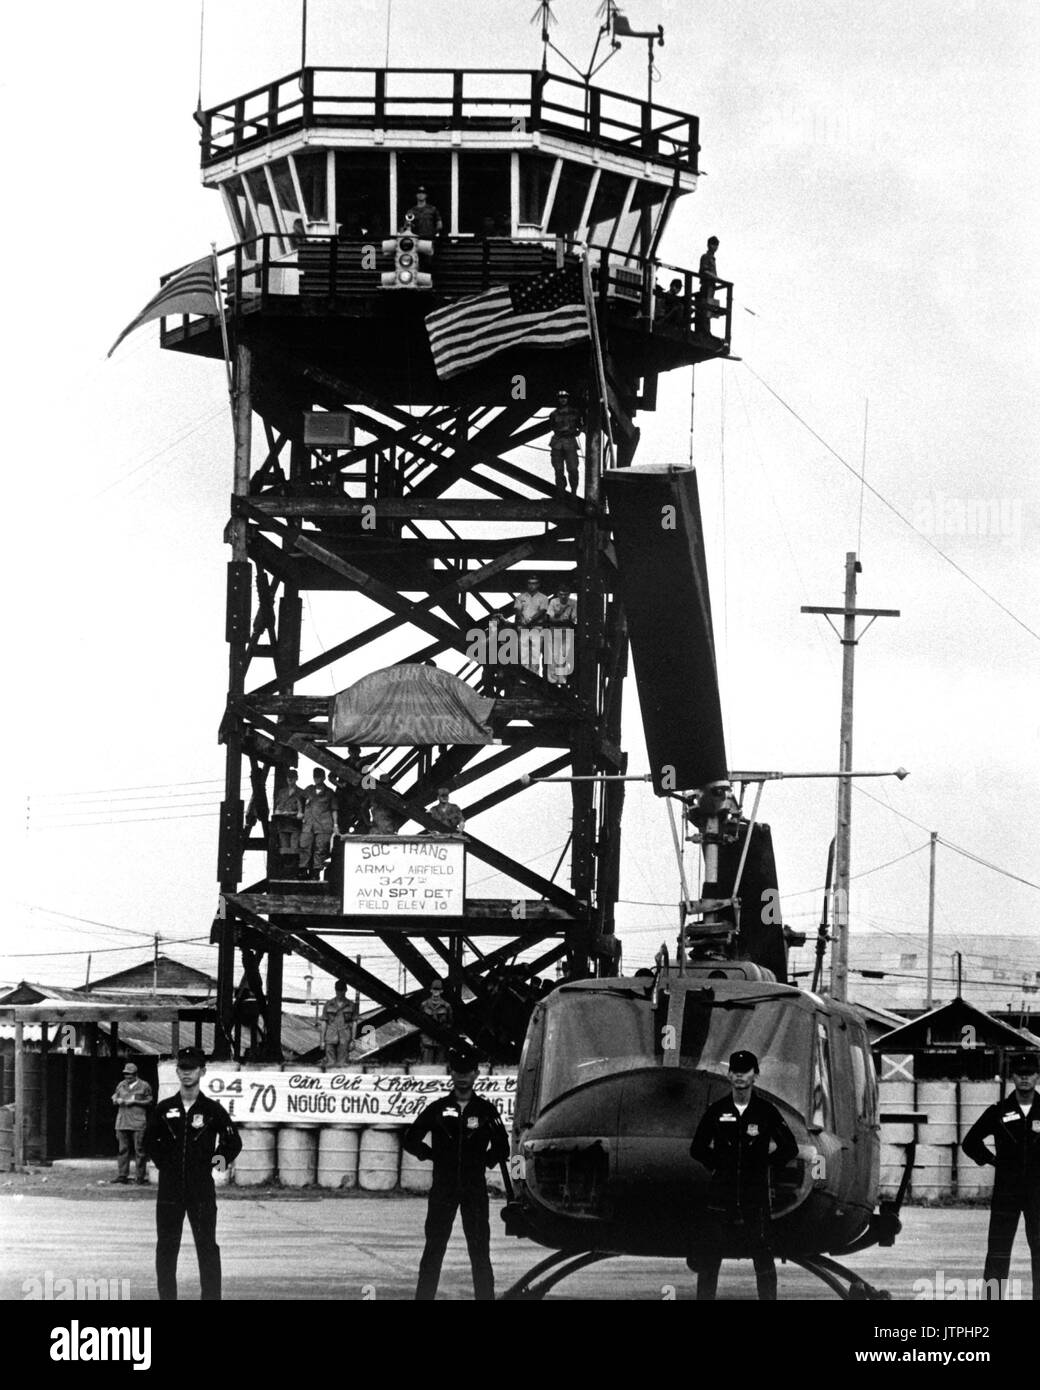 Moments before the U.S. flag was replaced by the Vietnamese flag, Vietnamese Air Force crewmen line up before one of the 62 UH-1 'Huey' helicopters turned over to them November 4, 1970, along with command of the Soc Trang airfield.  (USIA) EXACT DATE SHOT UNKNOWN NARA FILE #:  306-MVP-14-31 WAR & CONFLICT BOOK #:  401 Stock Photo